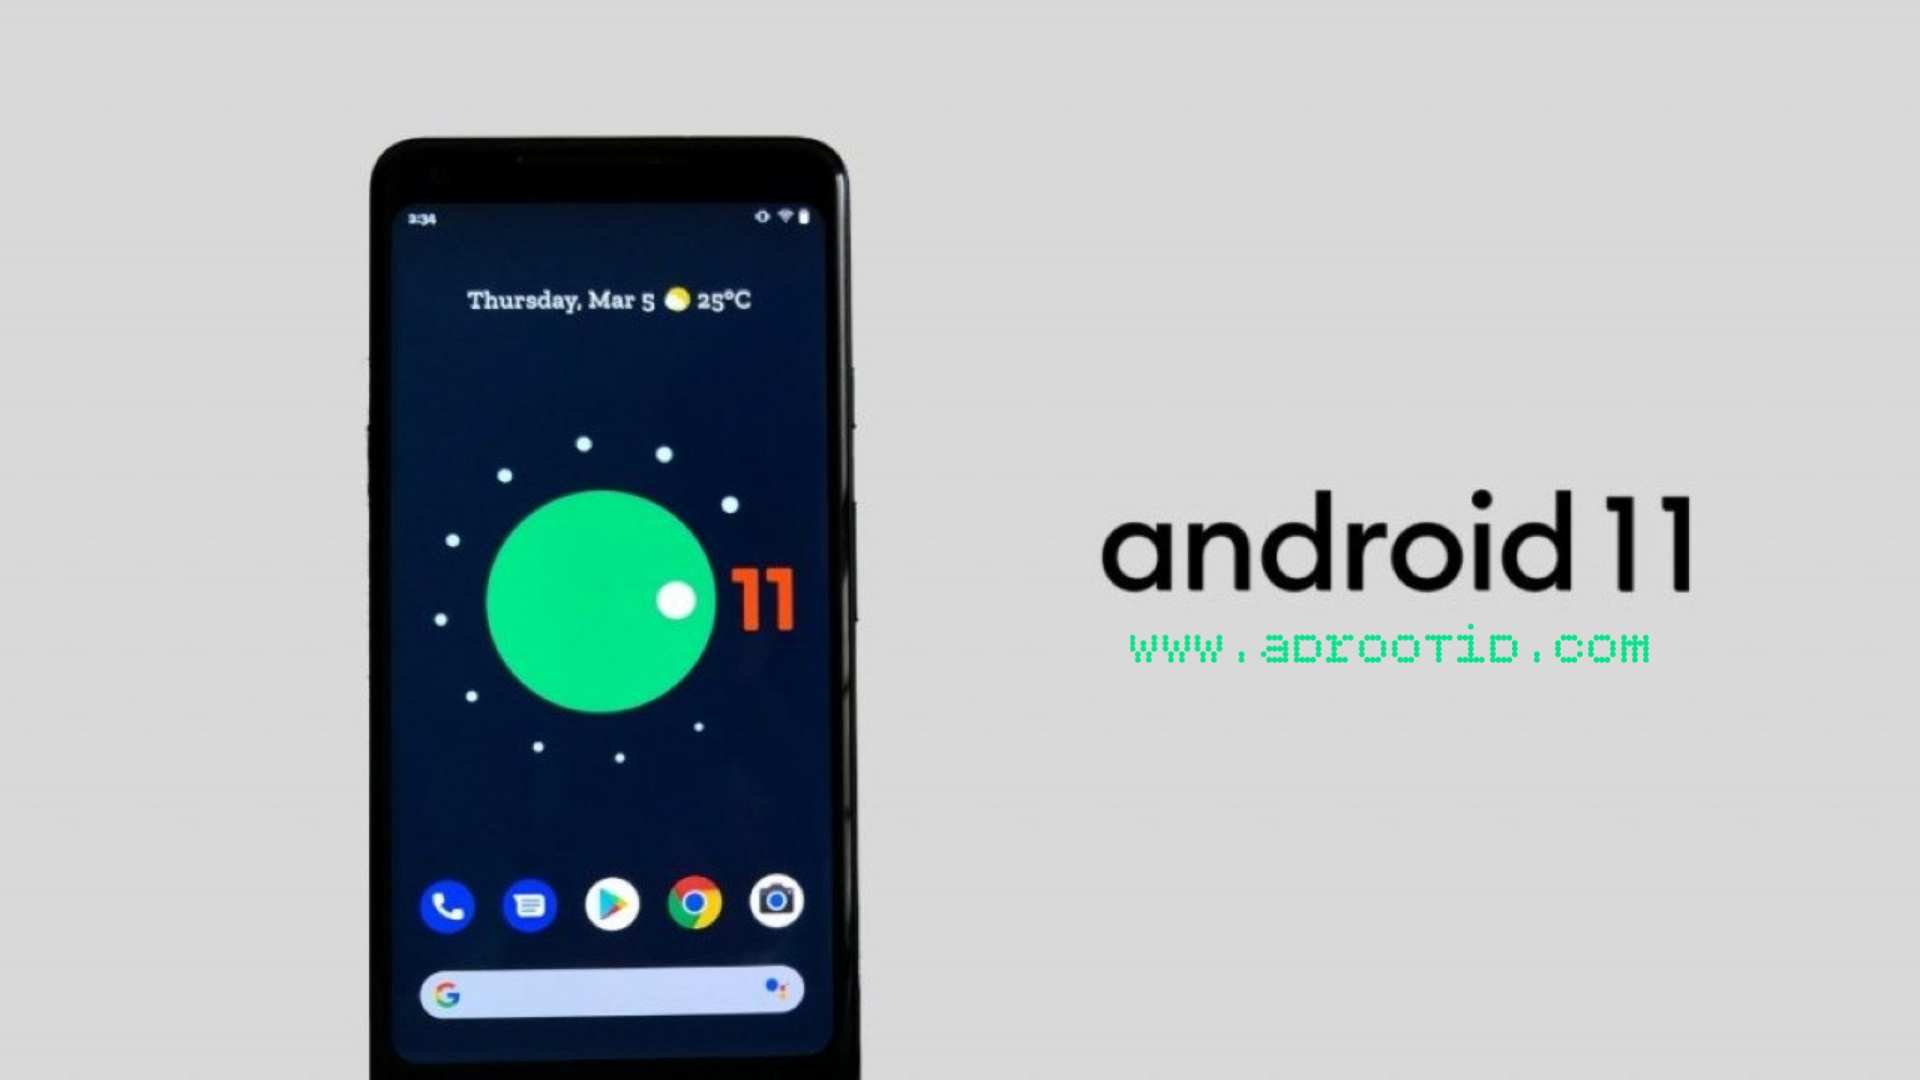 Rom Android 11 Stable [11.0.0 r3] untuk Max Pro M1 | X00TD